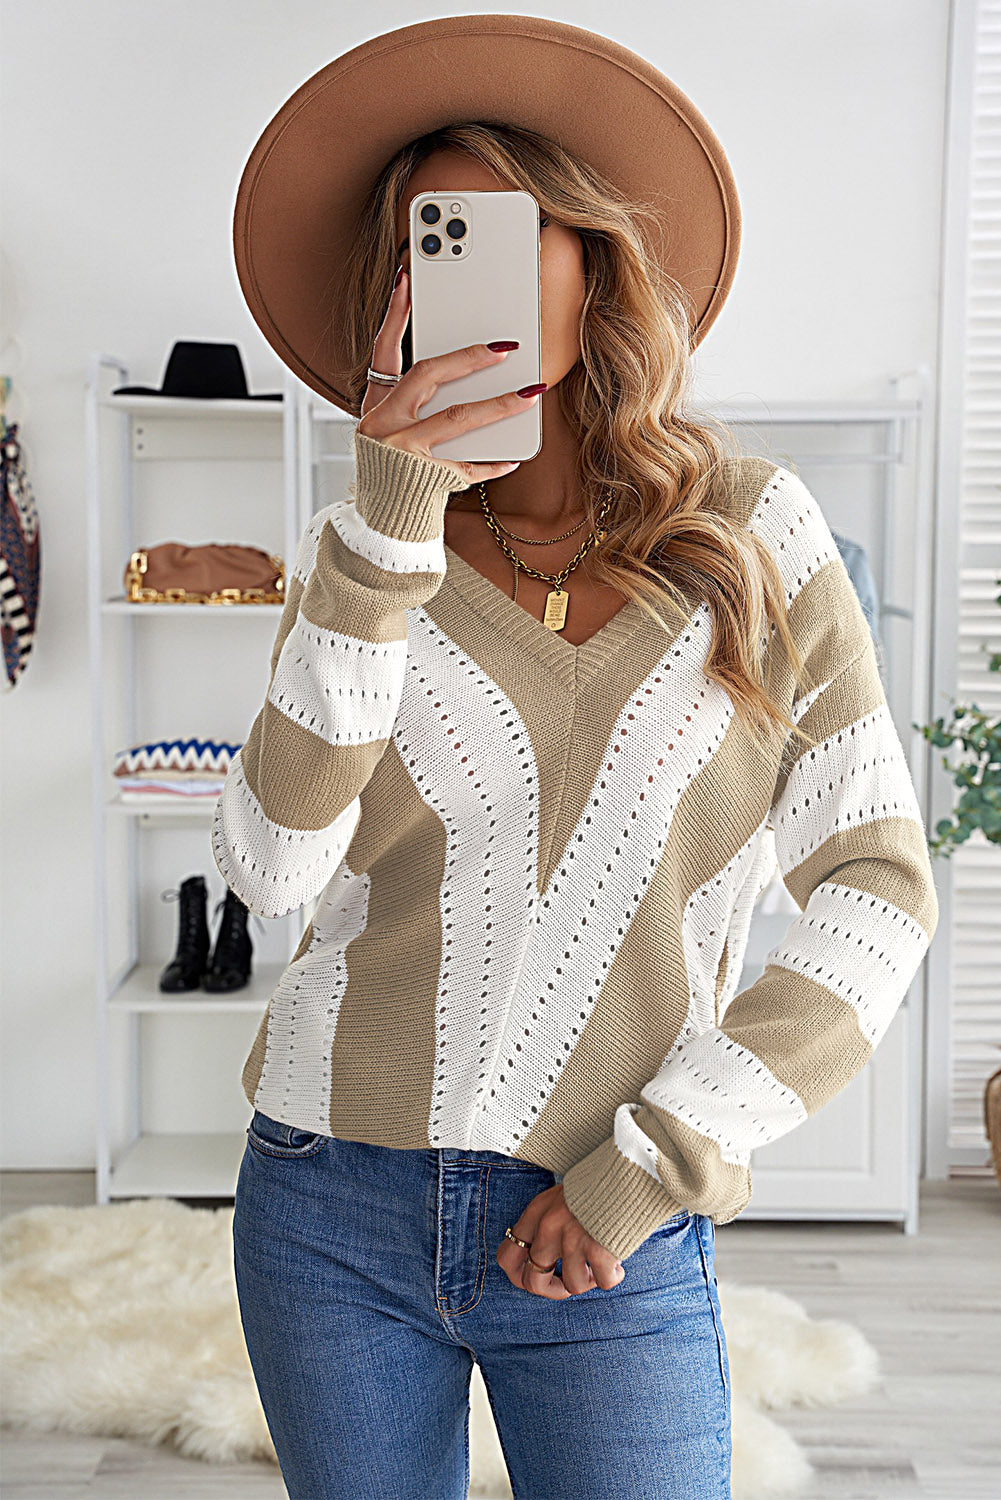 Gray Striped Colorblock V Neck Knitted Sweater